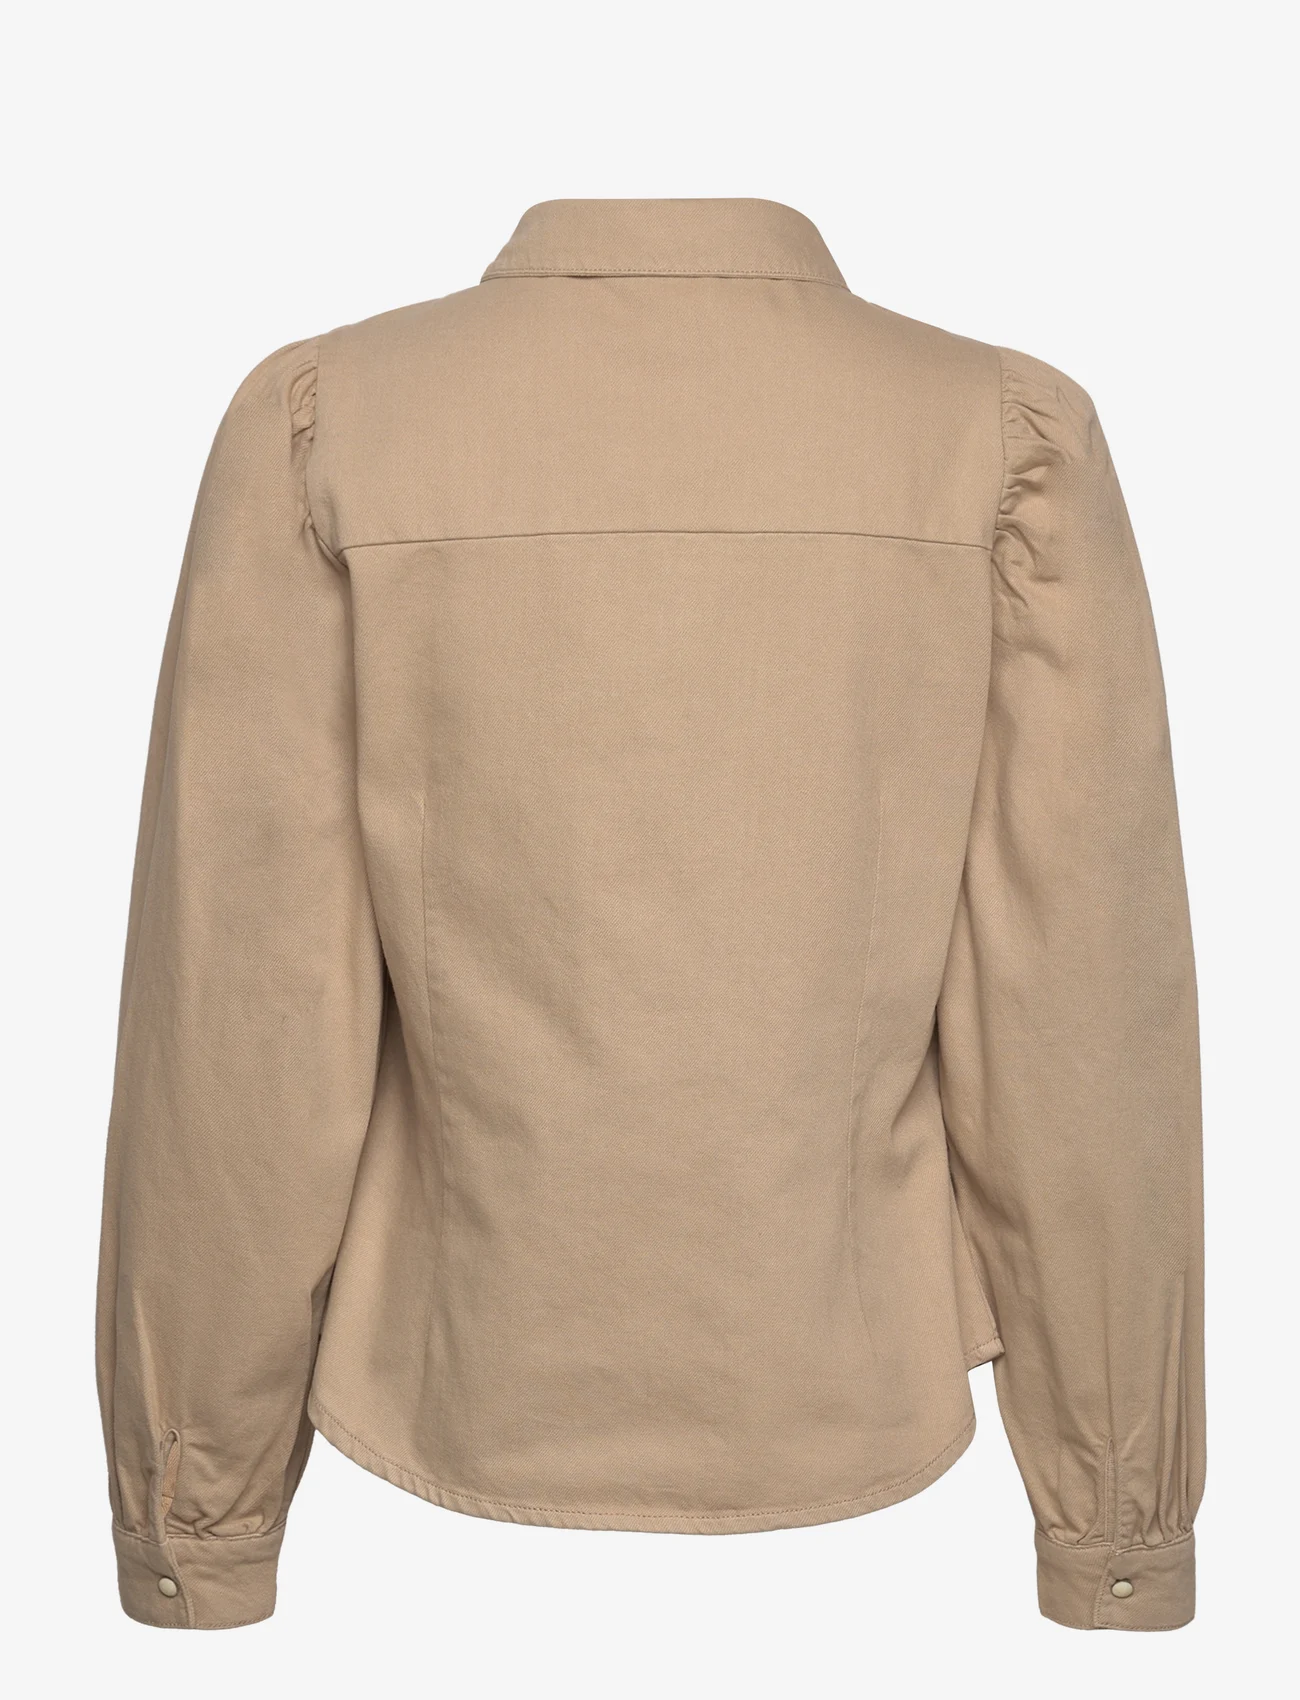 ONLY - ONLROCCO L/S COL SHIRT PNT - oxford tan - 1